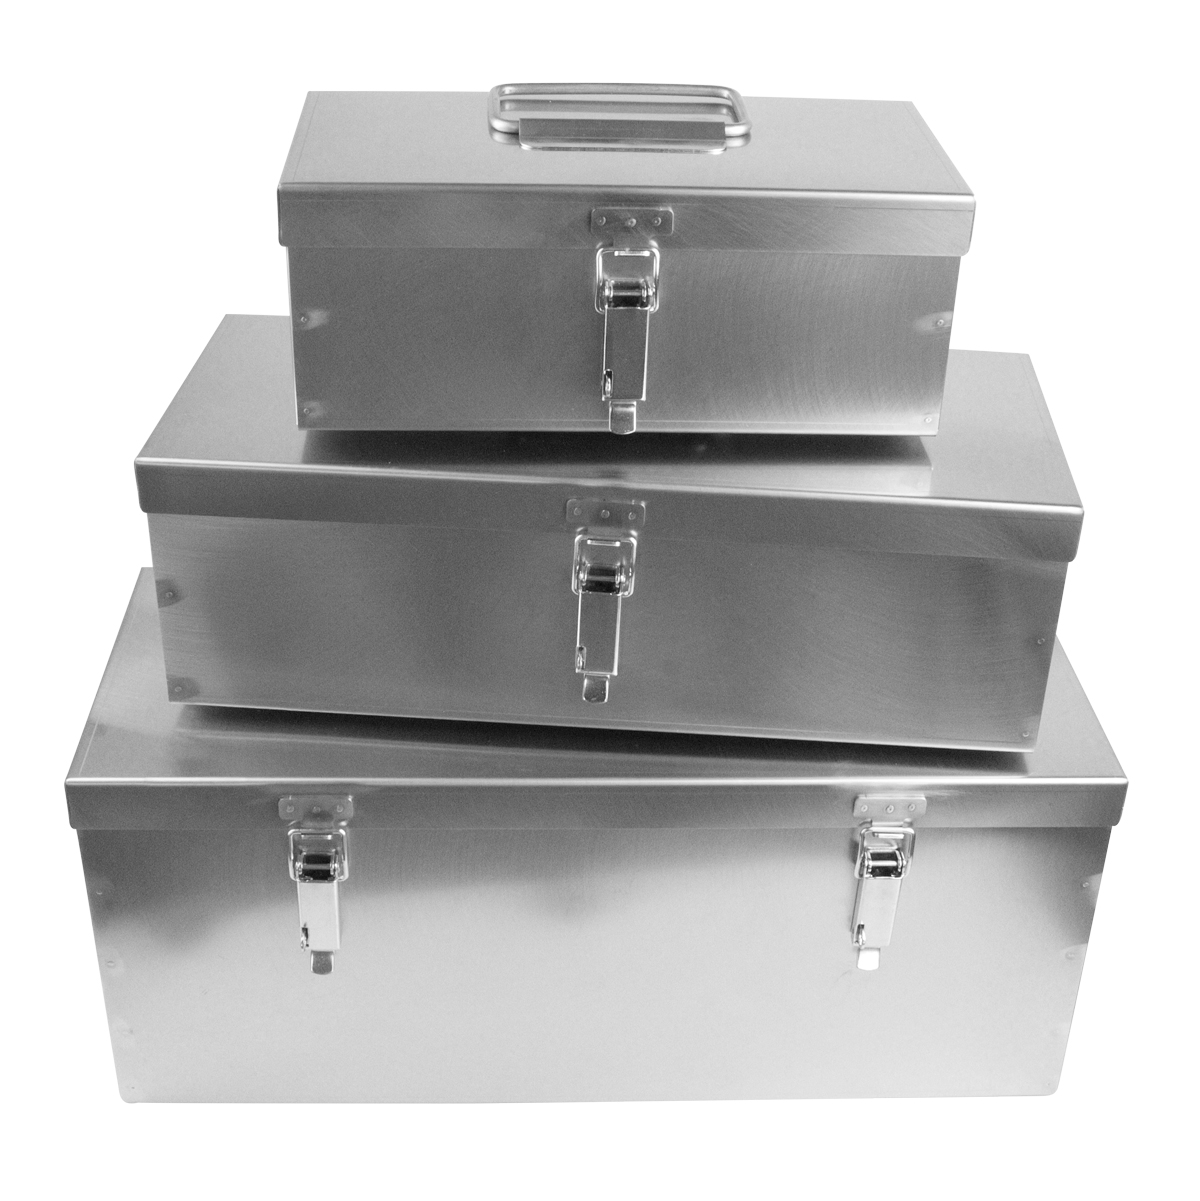 NEW! Stainless steel box for tools